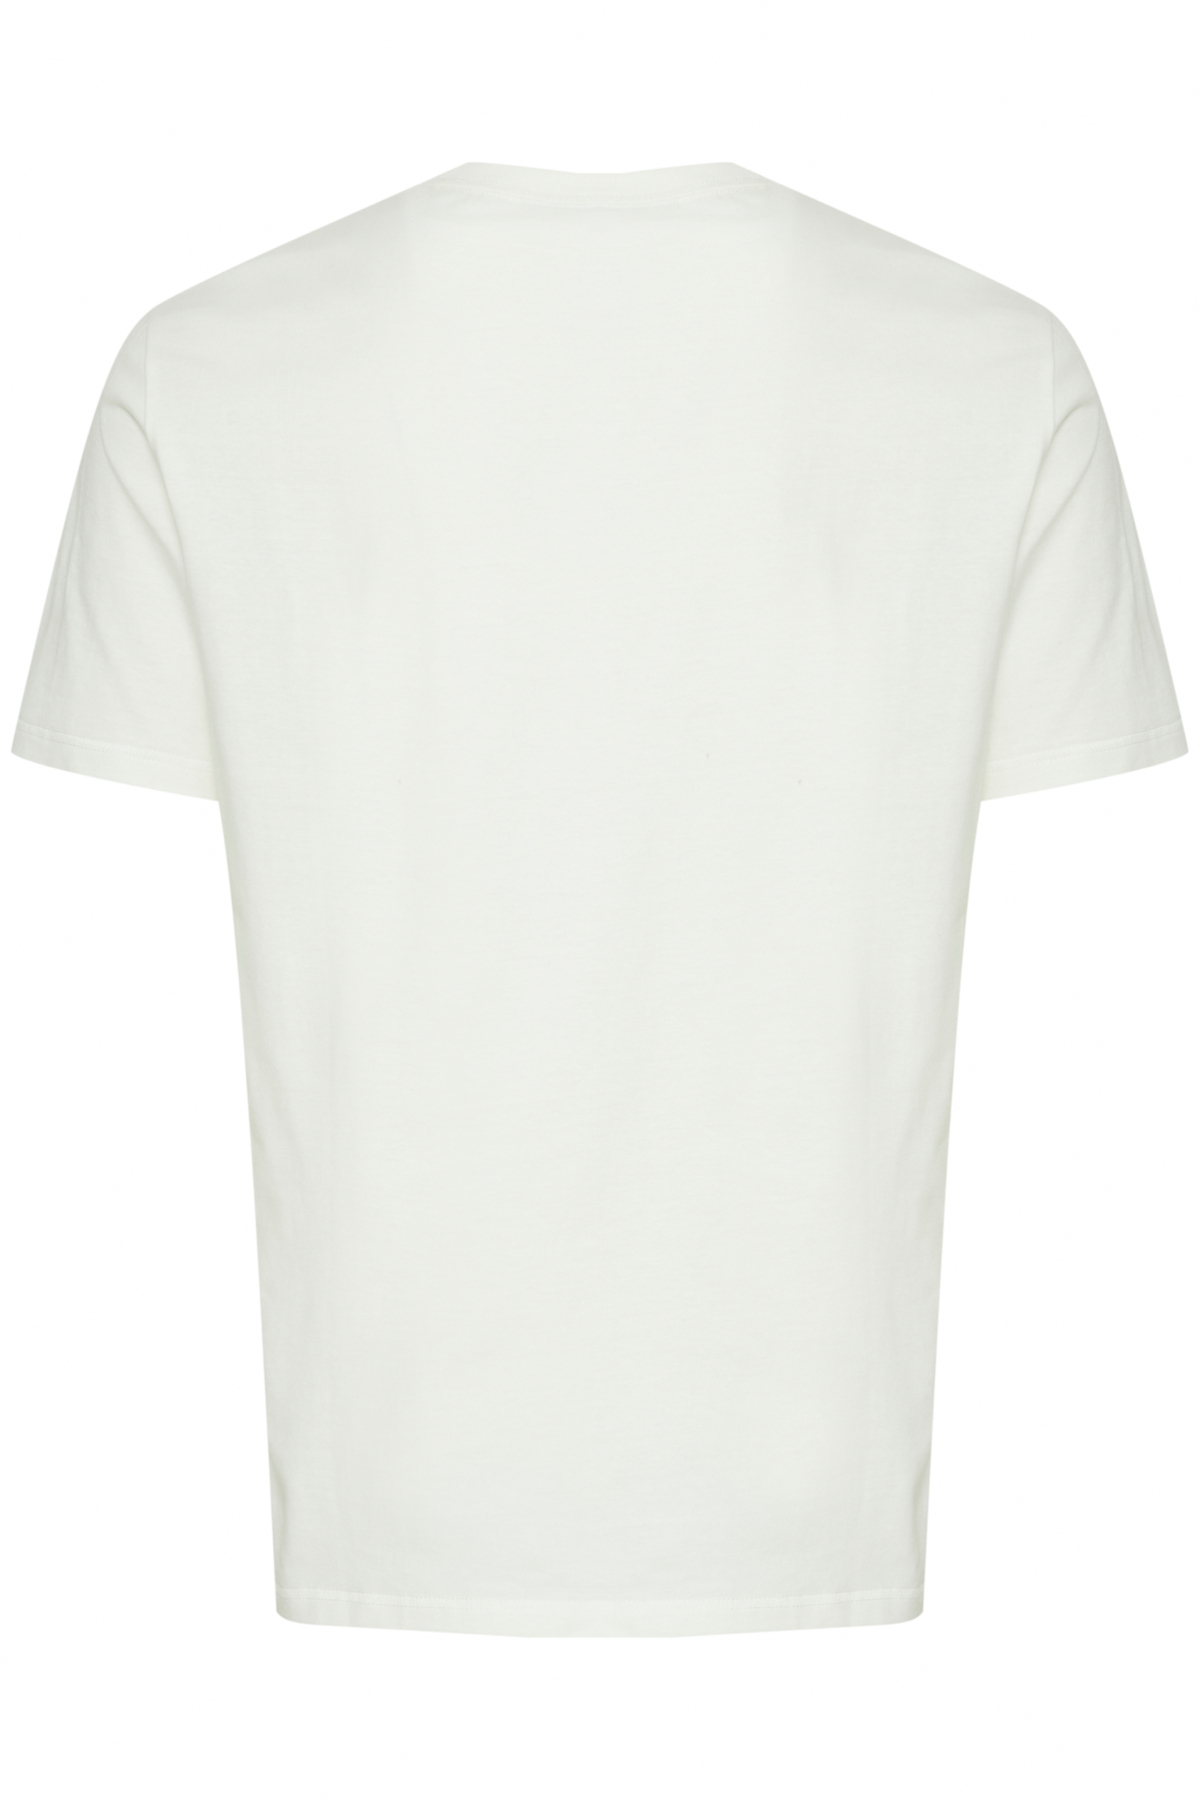 CF - Thor Tee With Person Assortment, White